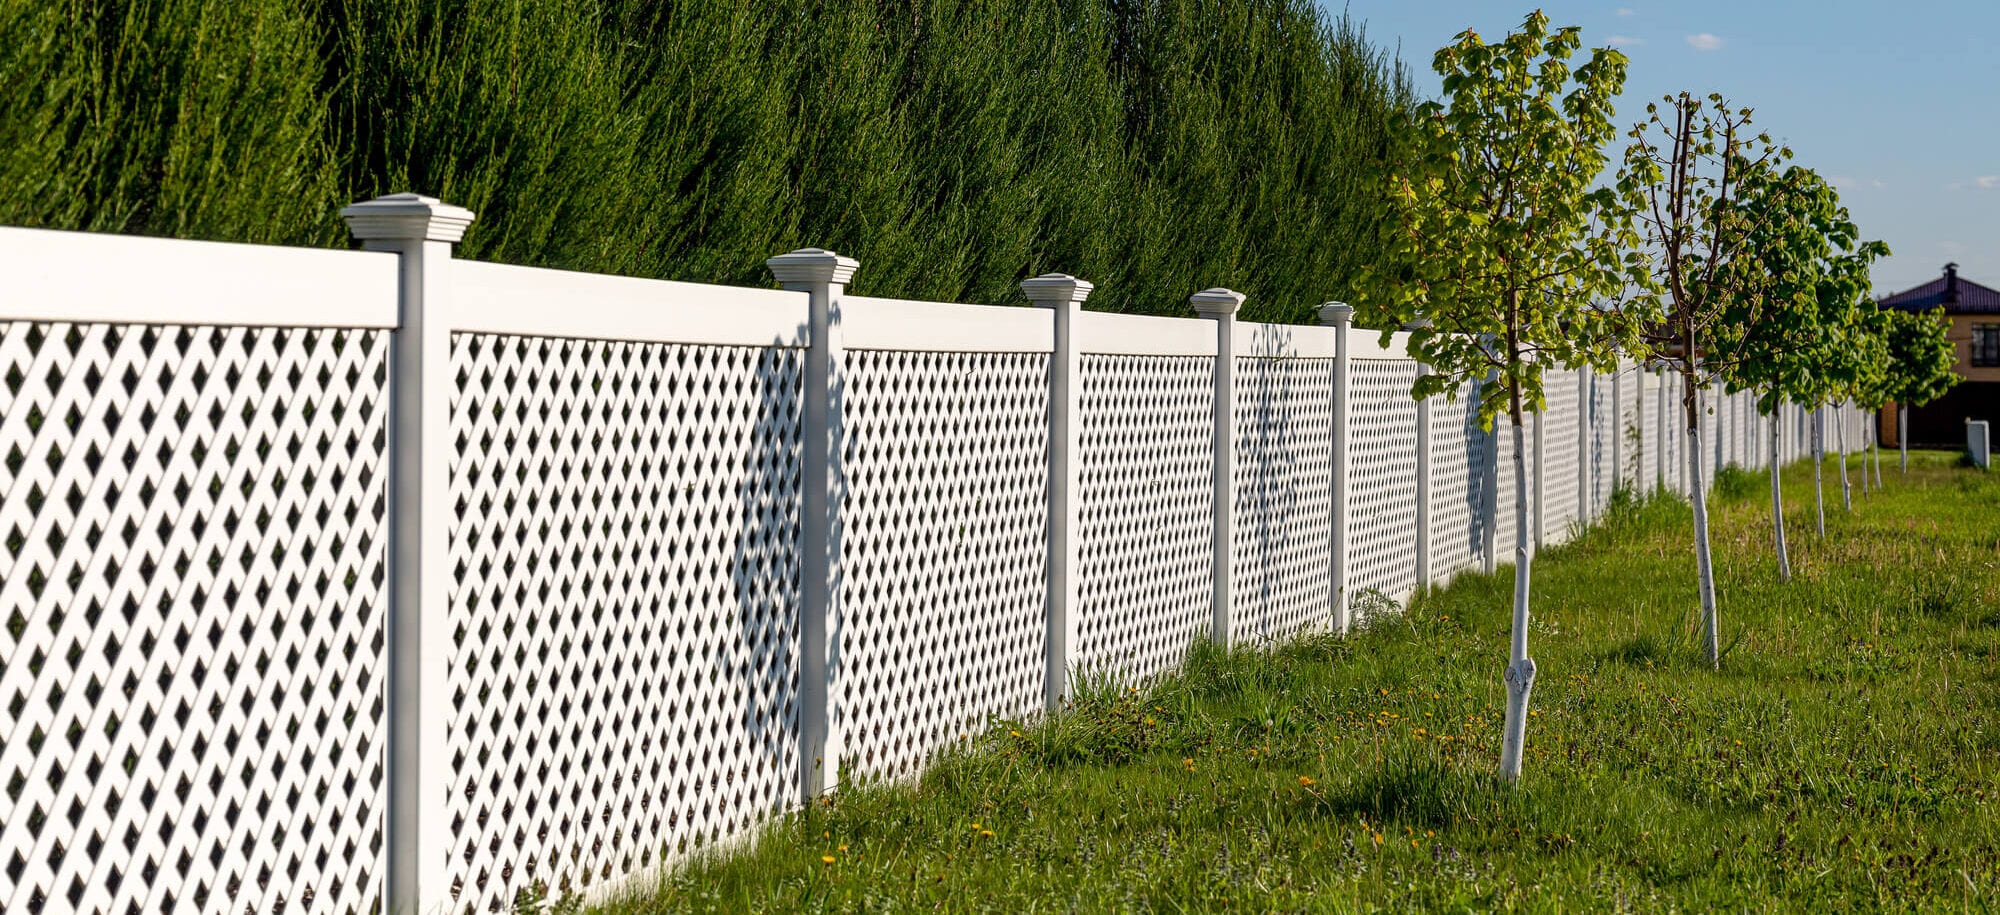 Repairing a Section of Vinyl Fencing